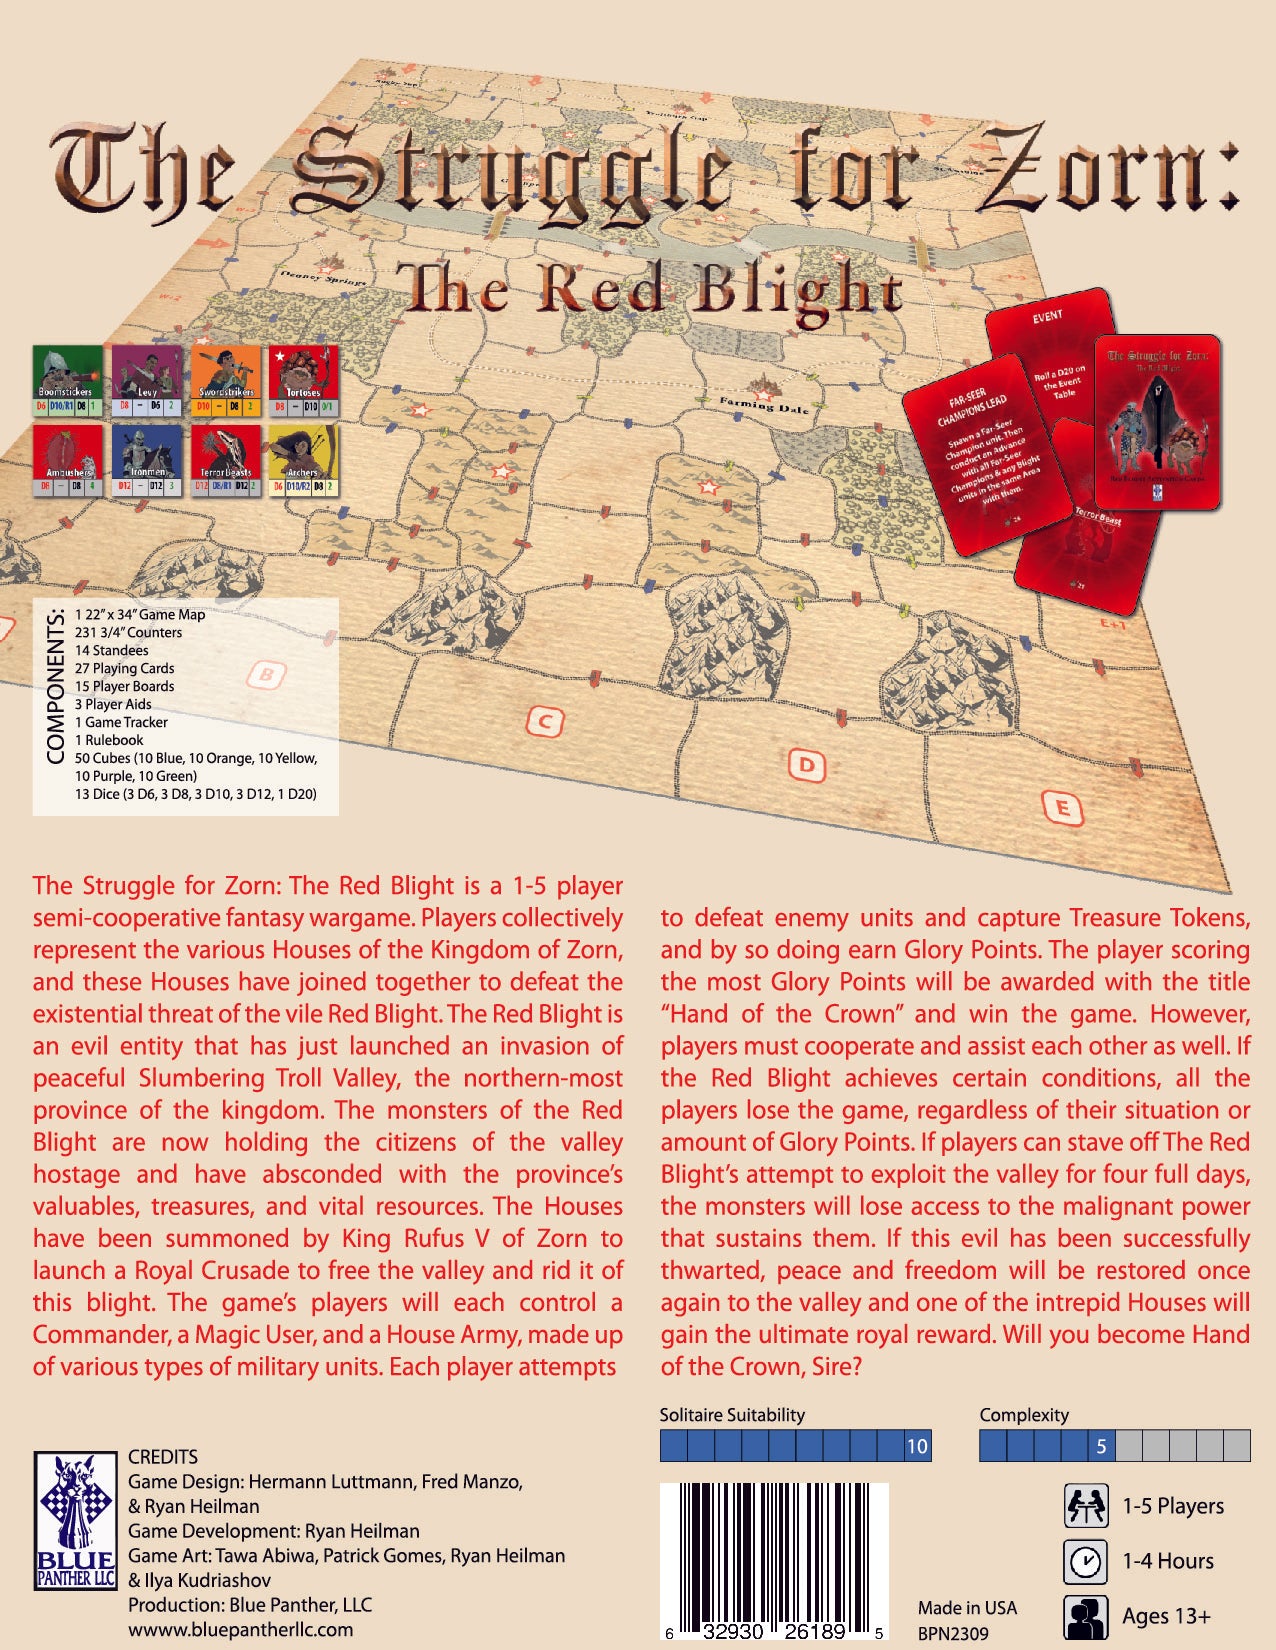 The Struggle for Zorn: The Red Blight